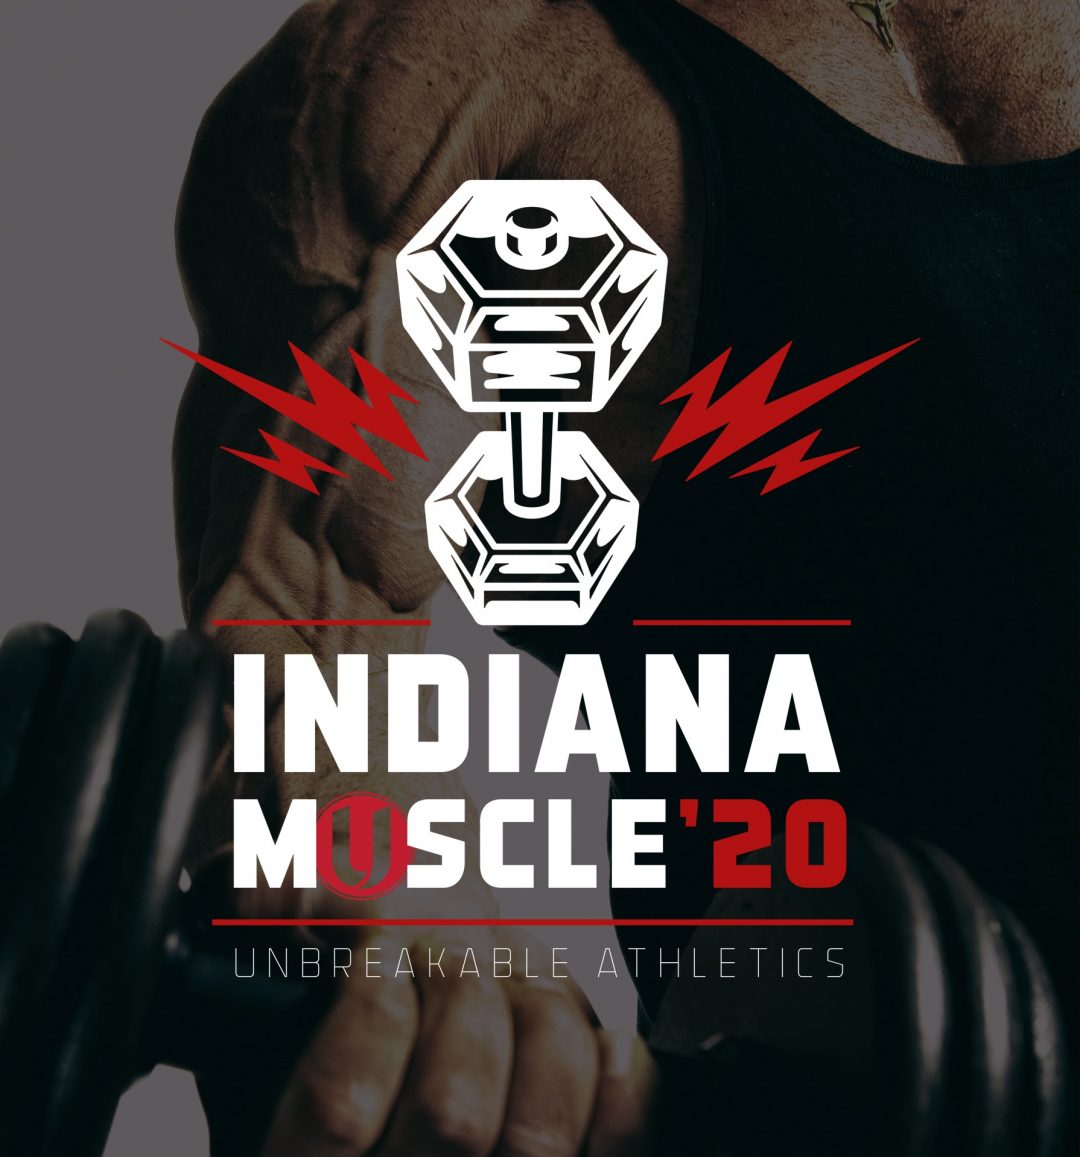 Indiana Muscle 2020